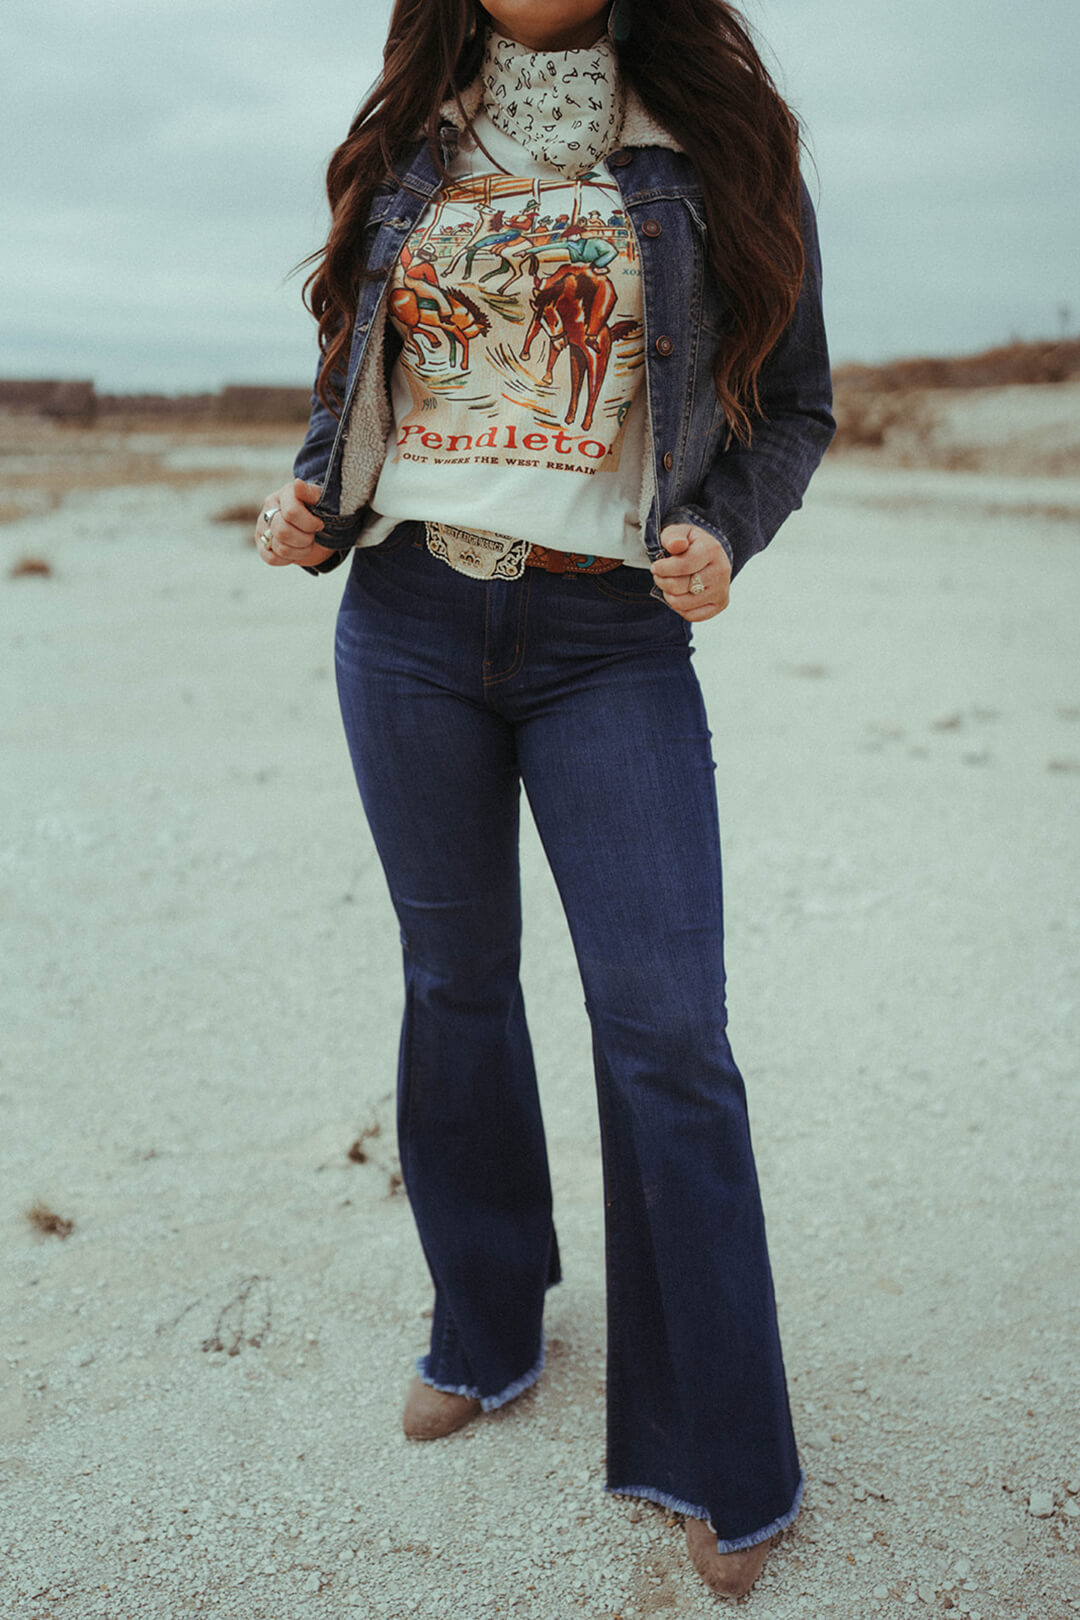 Woman modeling a pair of Judy Blue Flares.  The flares are zip fly and raw hem.  The pants are worn with the Pendleton graphic tee and the bandana scarf.